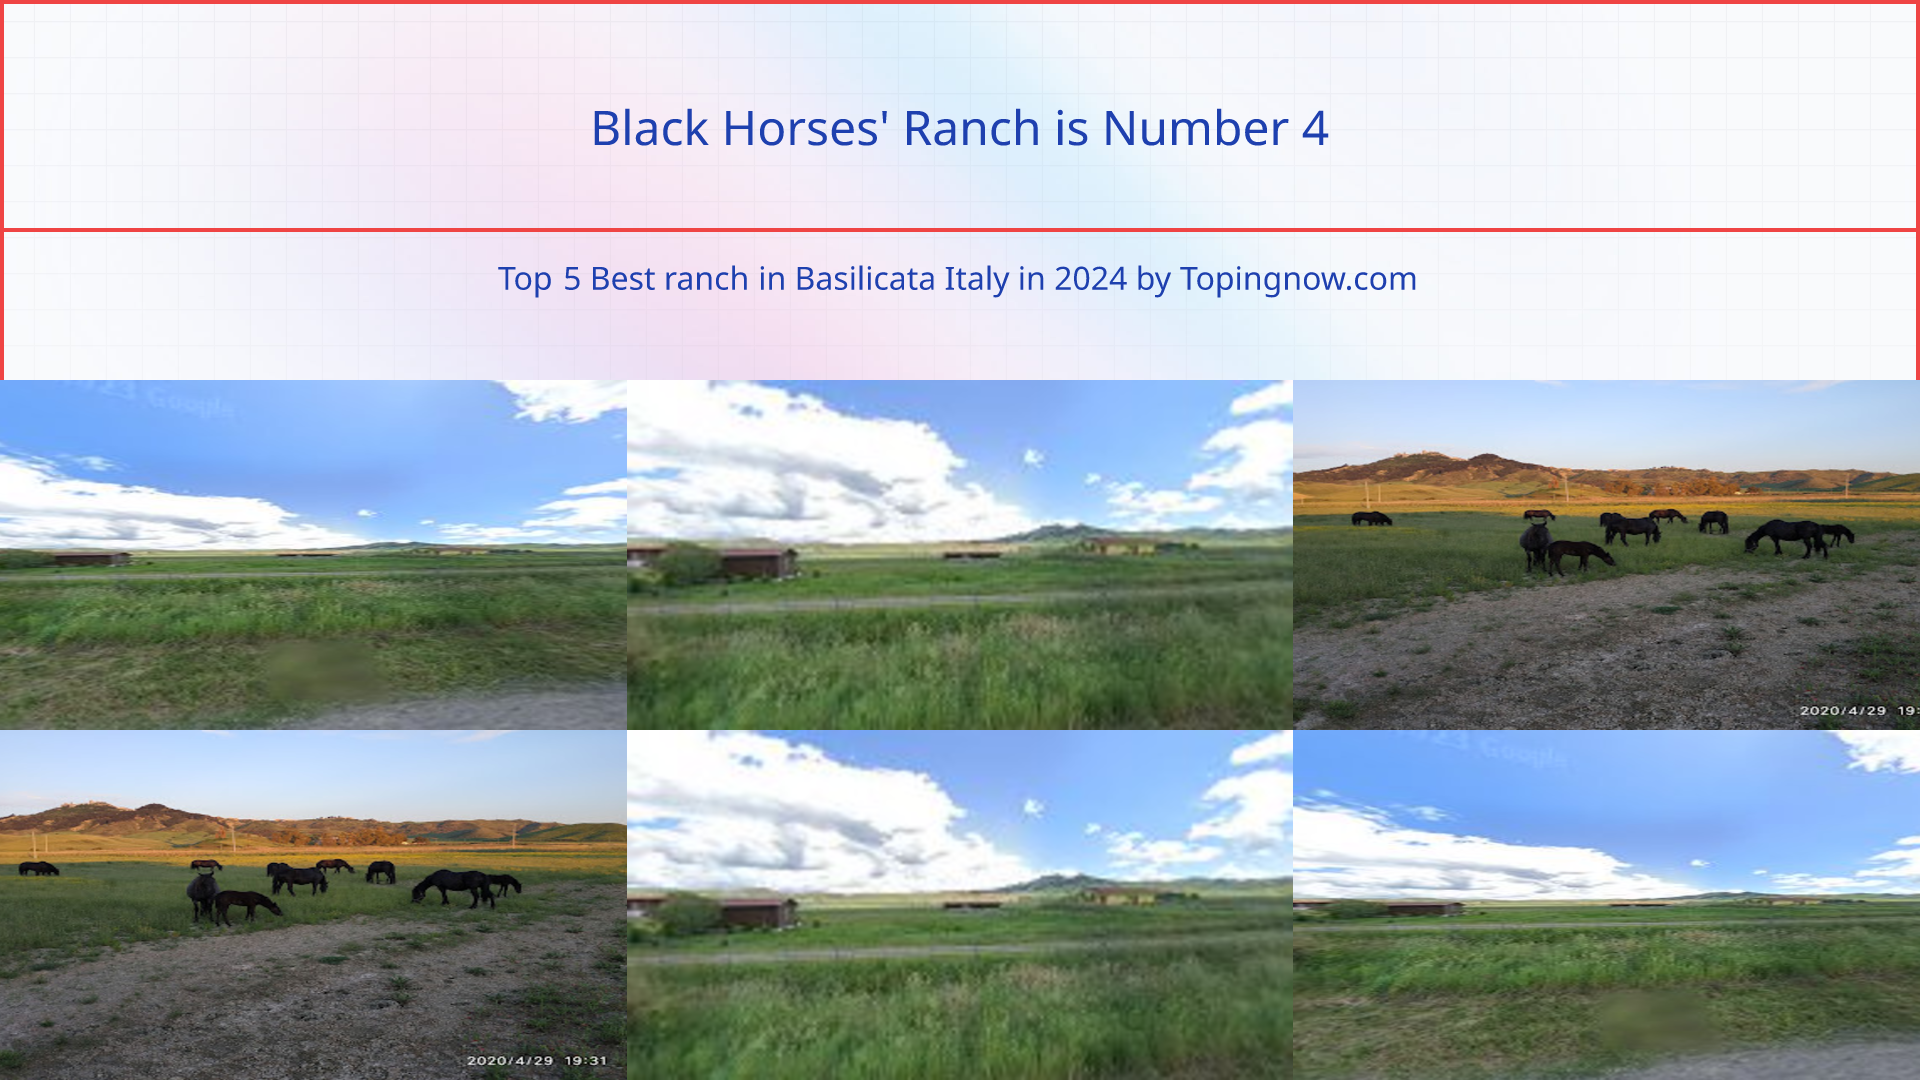 Black Horses' Ranch: Top 5 Best ranch in Basilicata Italy in 2024